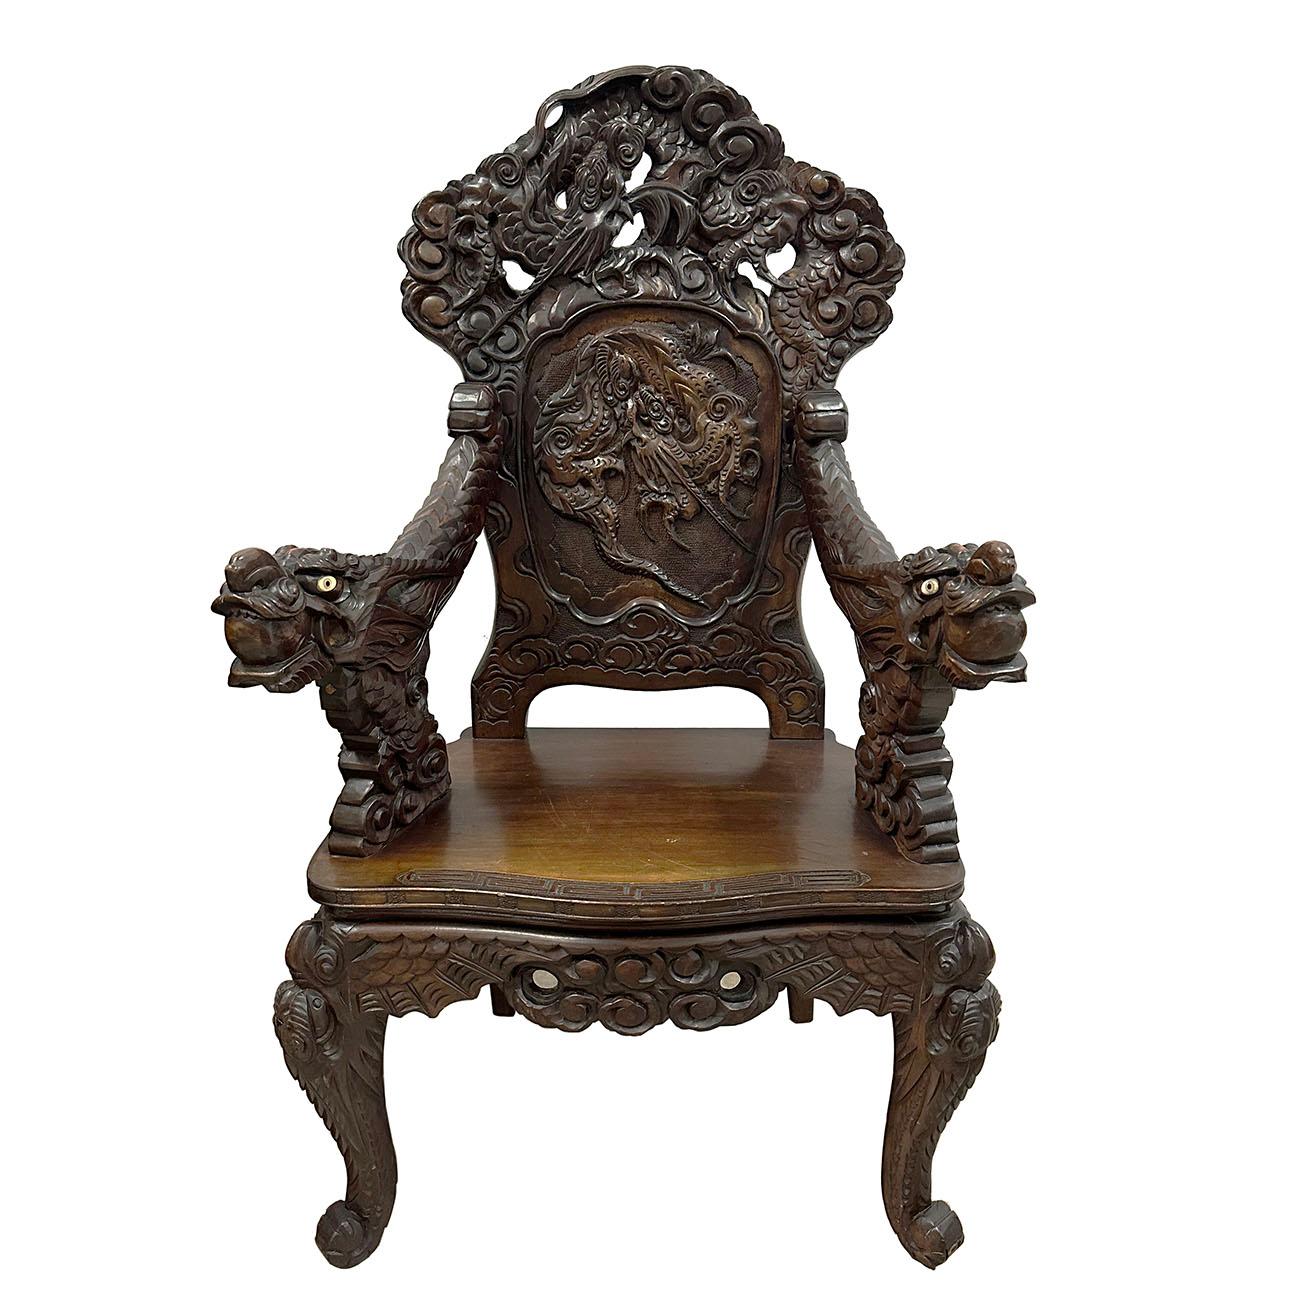 Up for sale are this stunning original Japanese Export 19th Century Meiji period hand carved Dragon Throne chair with intricate carving works of dragons all over the chairs. The dragon motif is mirrored into the arms with thick scales and gnarling